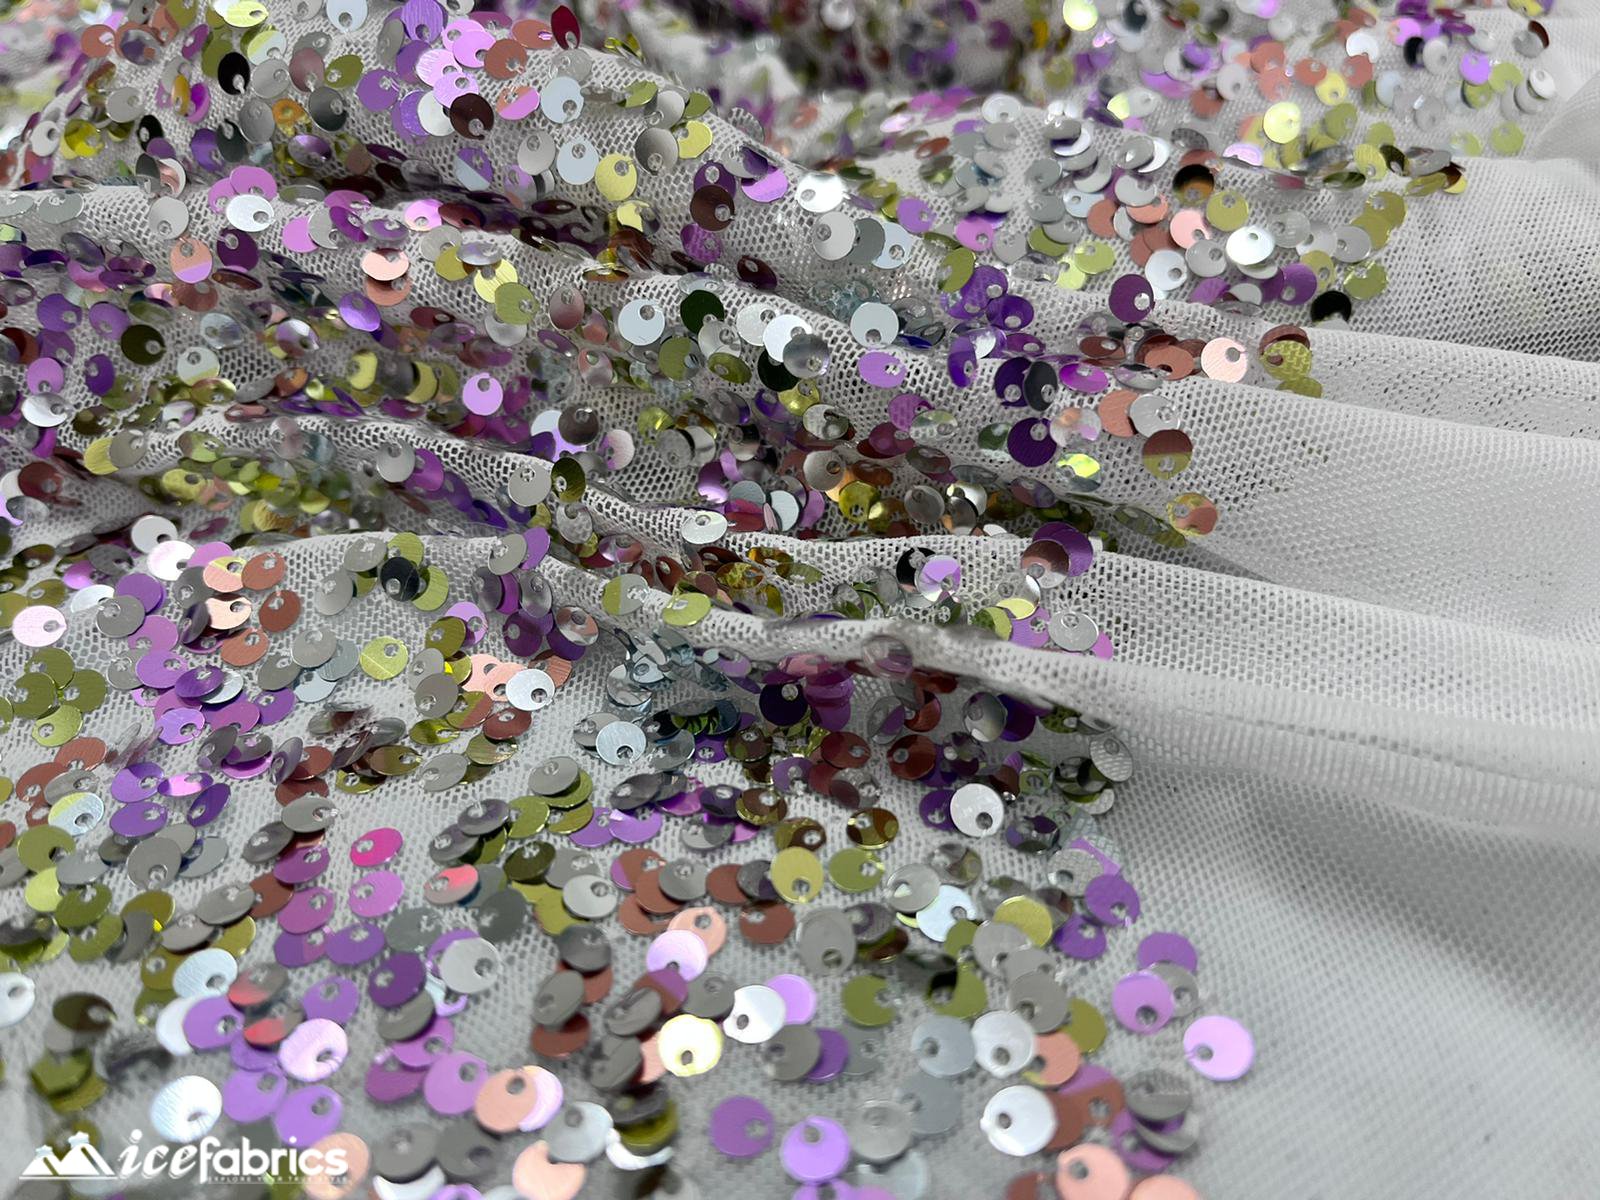 Iridescent Lavender Green 3 Tone 4 Way Stretch Sequin Fabric on White MeshICE FABRICSICE FABRICSBy The Yard (58" Wide)Iridescent Lavender Green 3 Tone 4 Way Stretch Sequin Fabric on White Mesh ICE FABRICS